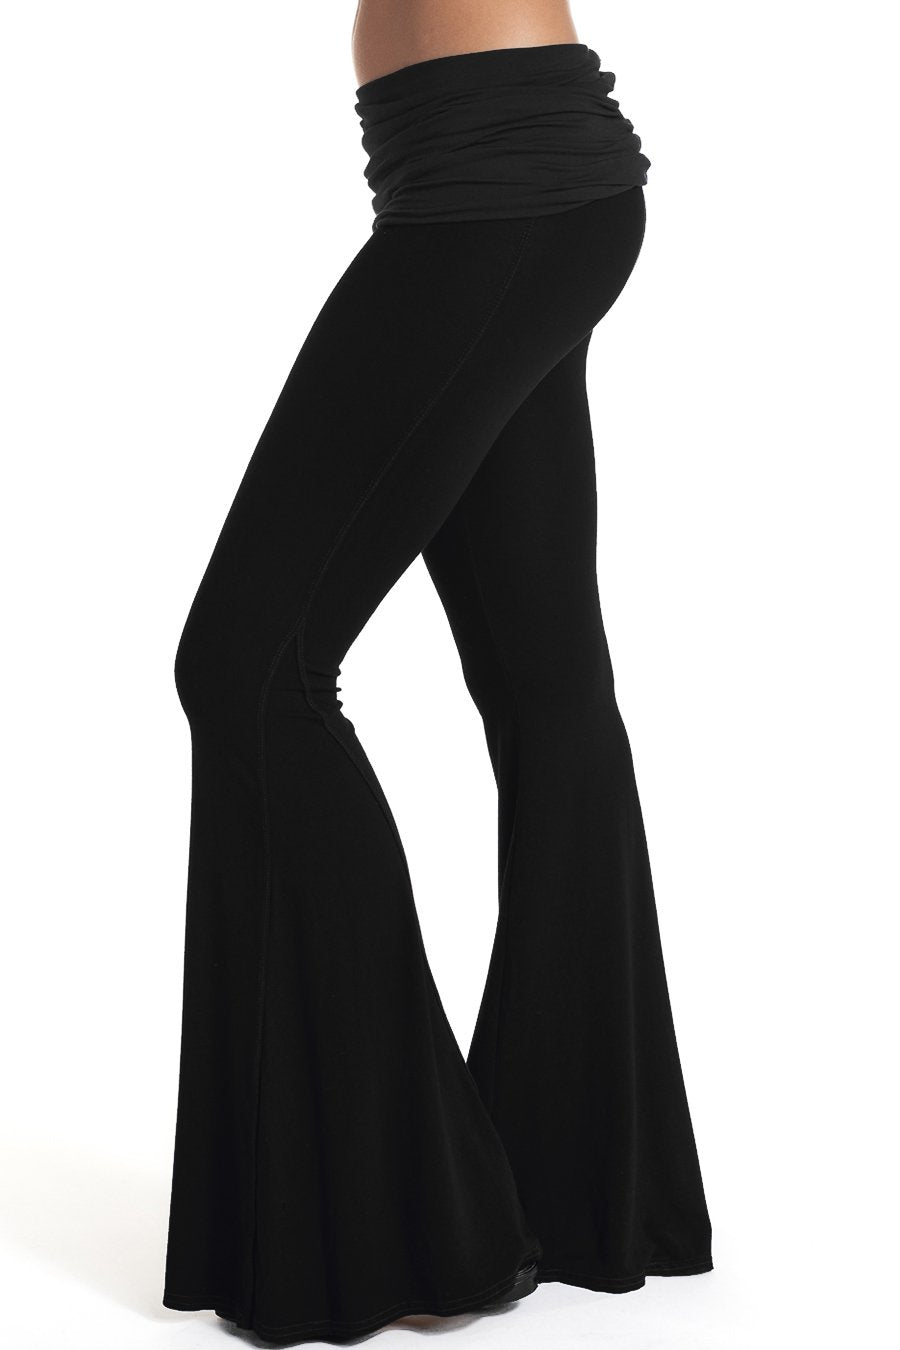 Hard Tail Forever Contour Rolldown Wide Leg Pants - Dark Charcoal